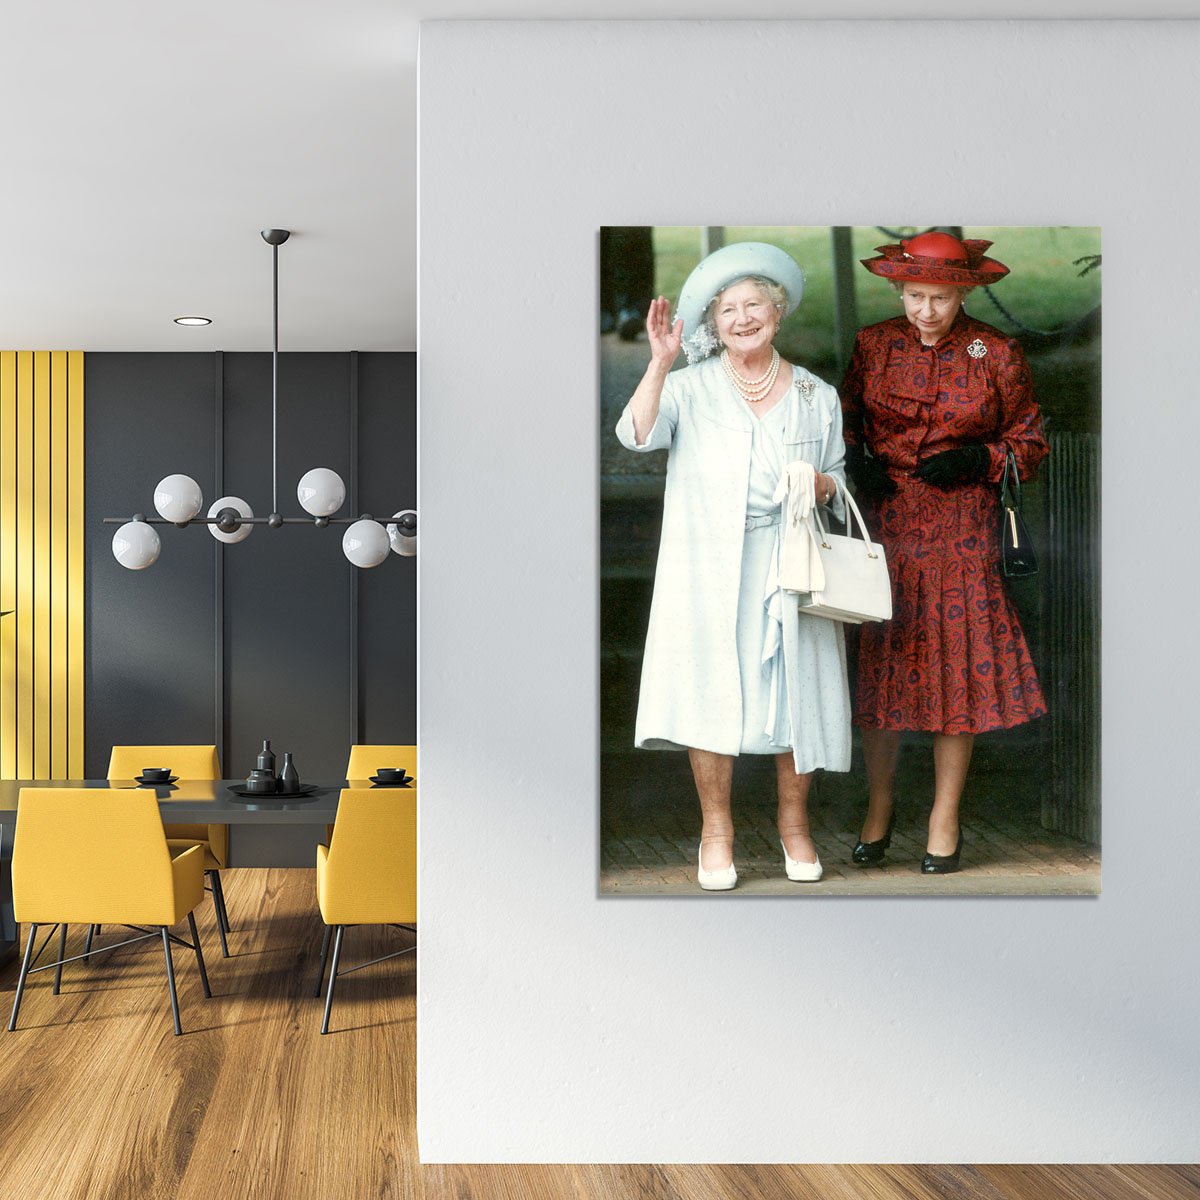 The Queen Mother on her 91st birthday with Queen Elizabeth Canvas Print or Poster